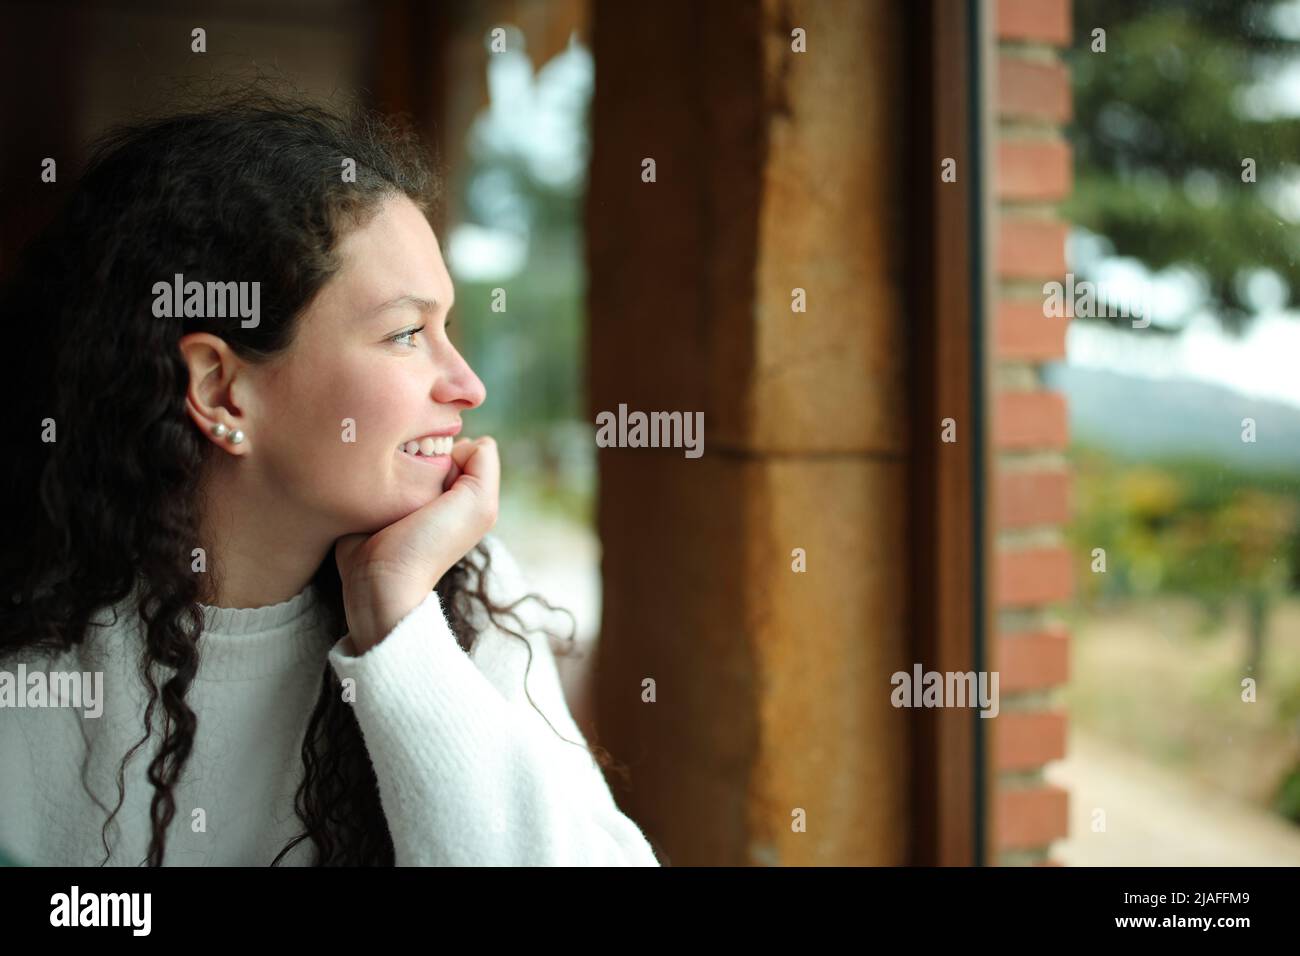 Side view portrait of a happy woman sitting looking through a window Stock Photo